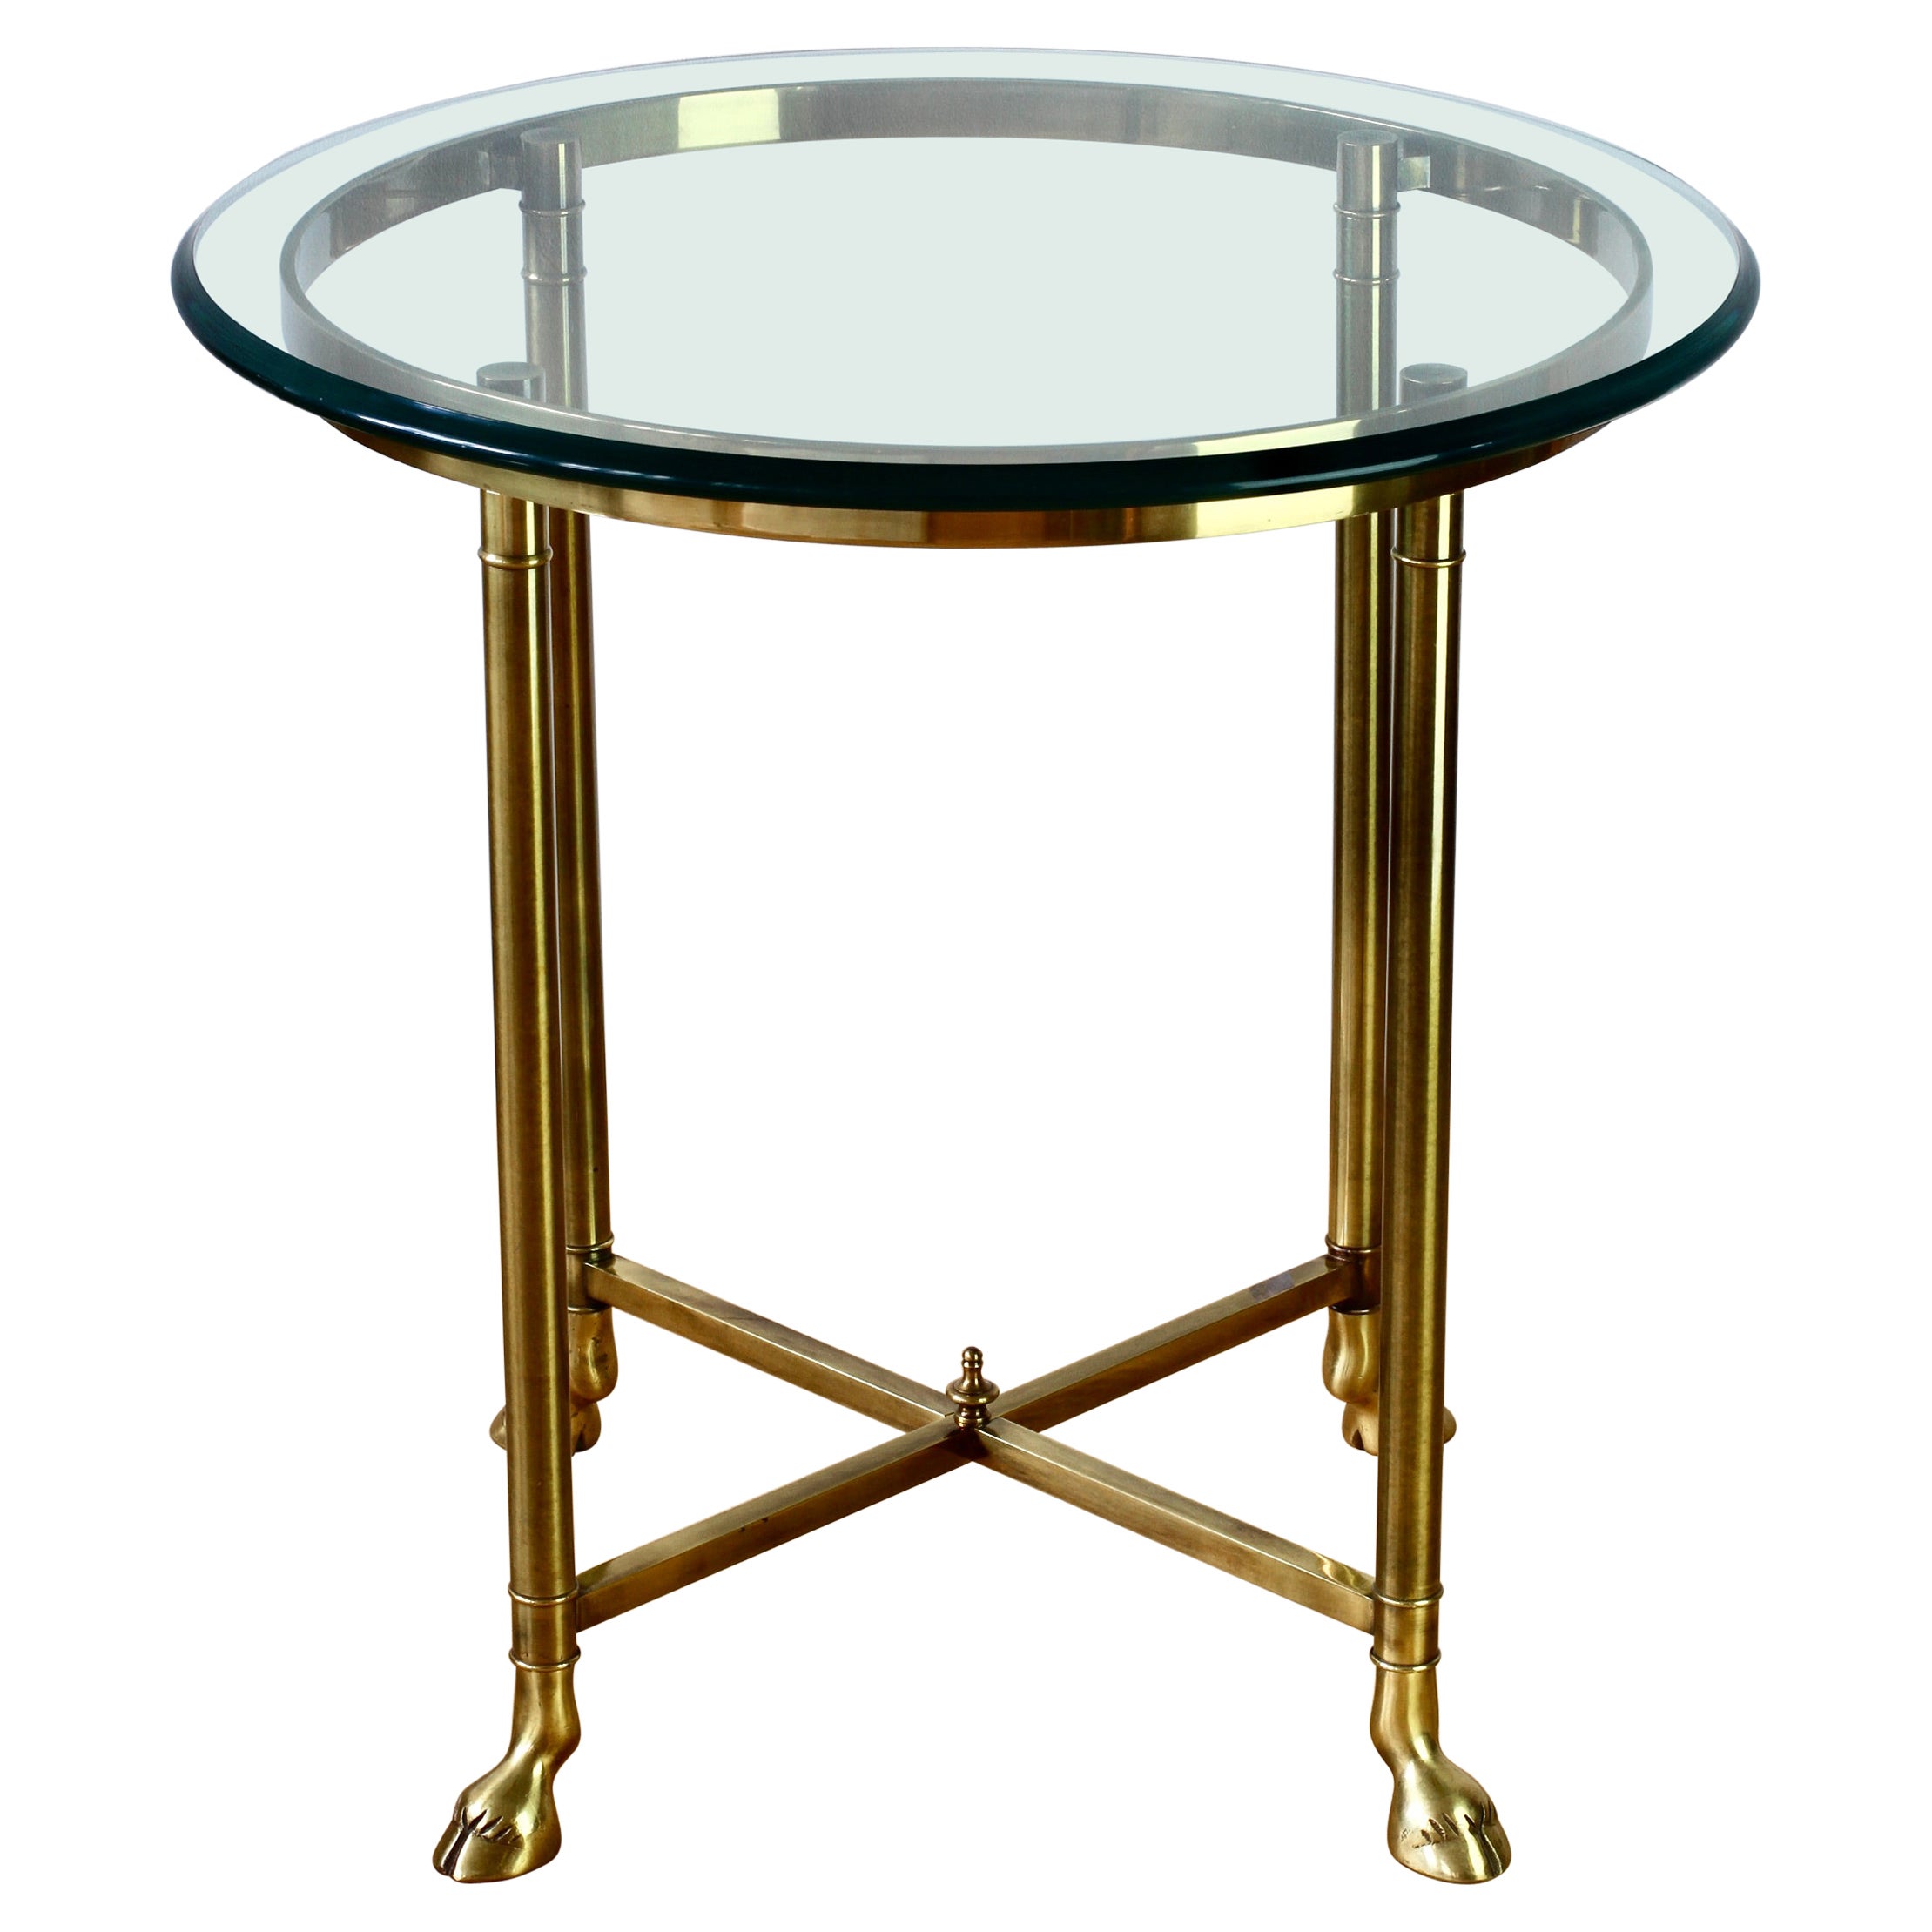 Maison Charles Style Cast Brass and Glass Side or End Table by La Barge, c. 1970